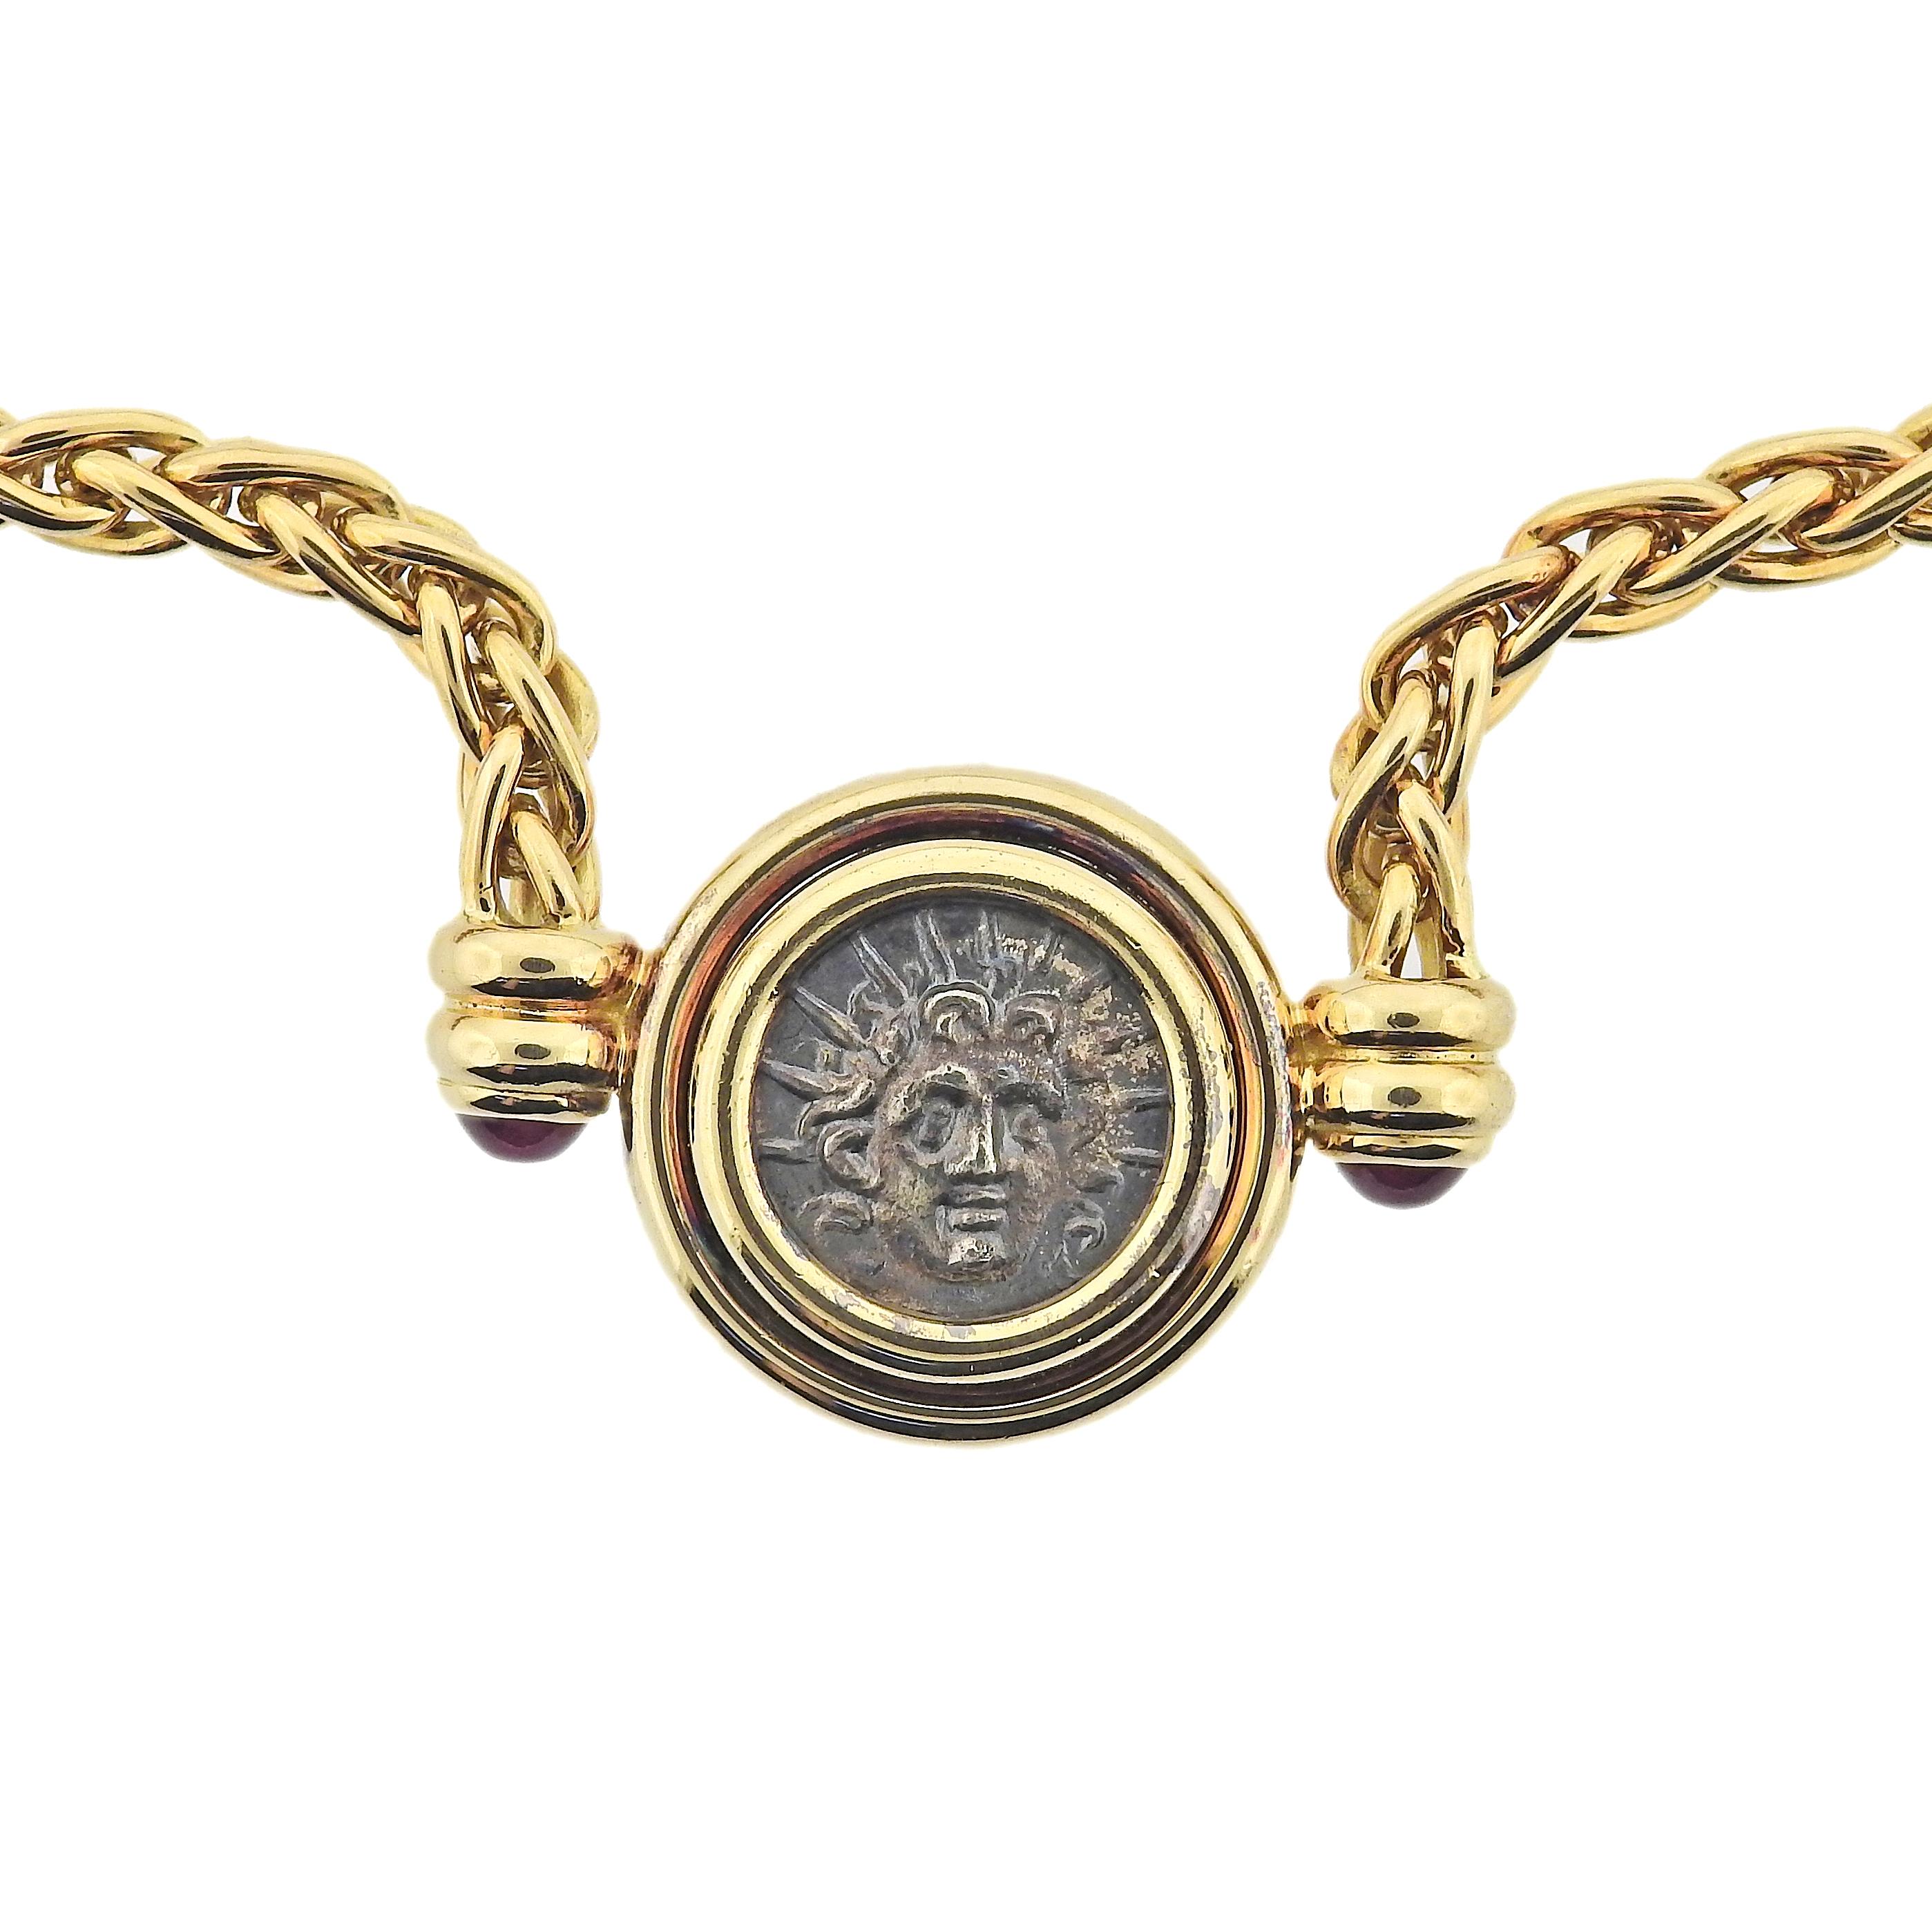 18k gold necklace by Bulgari featuring a bezel set ancient coin and ruby cabochon accents. Necklace measures 15.5 inches long, coin in bezel measures 17mm in diameter. Marked: Caria Rhodos 2 aime siele a.c., Bvlgari 750.